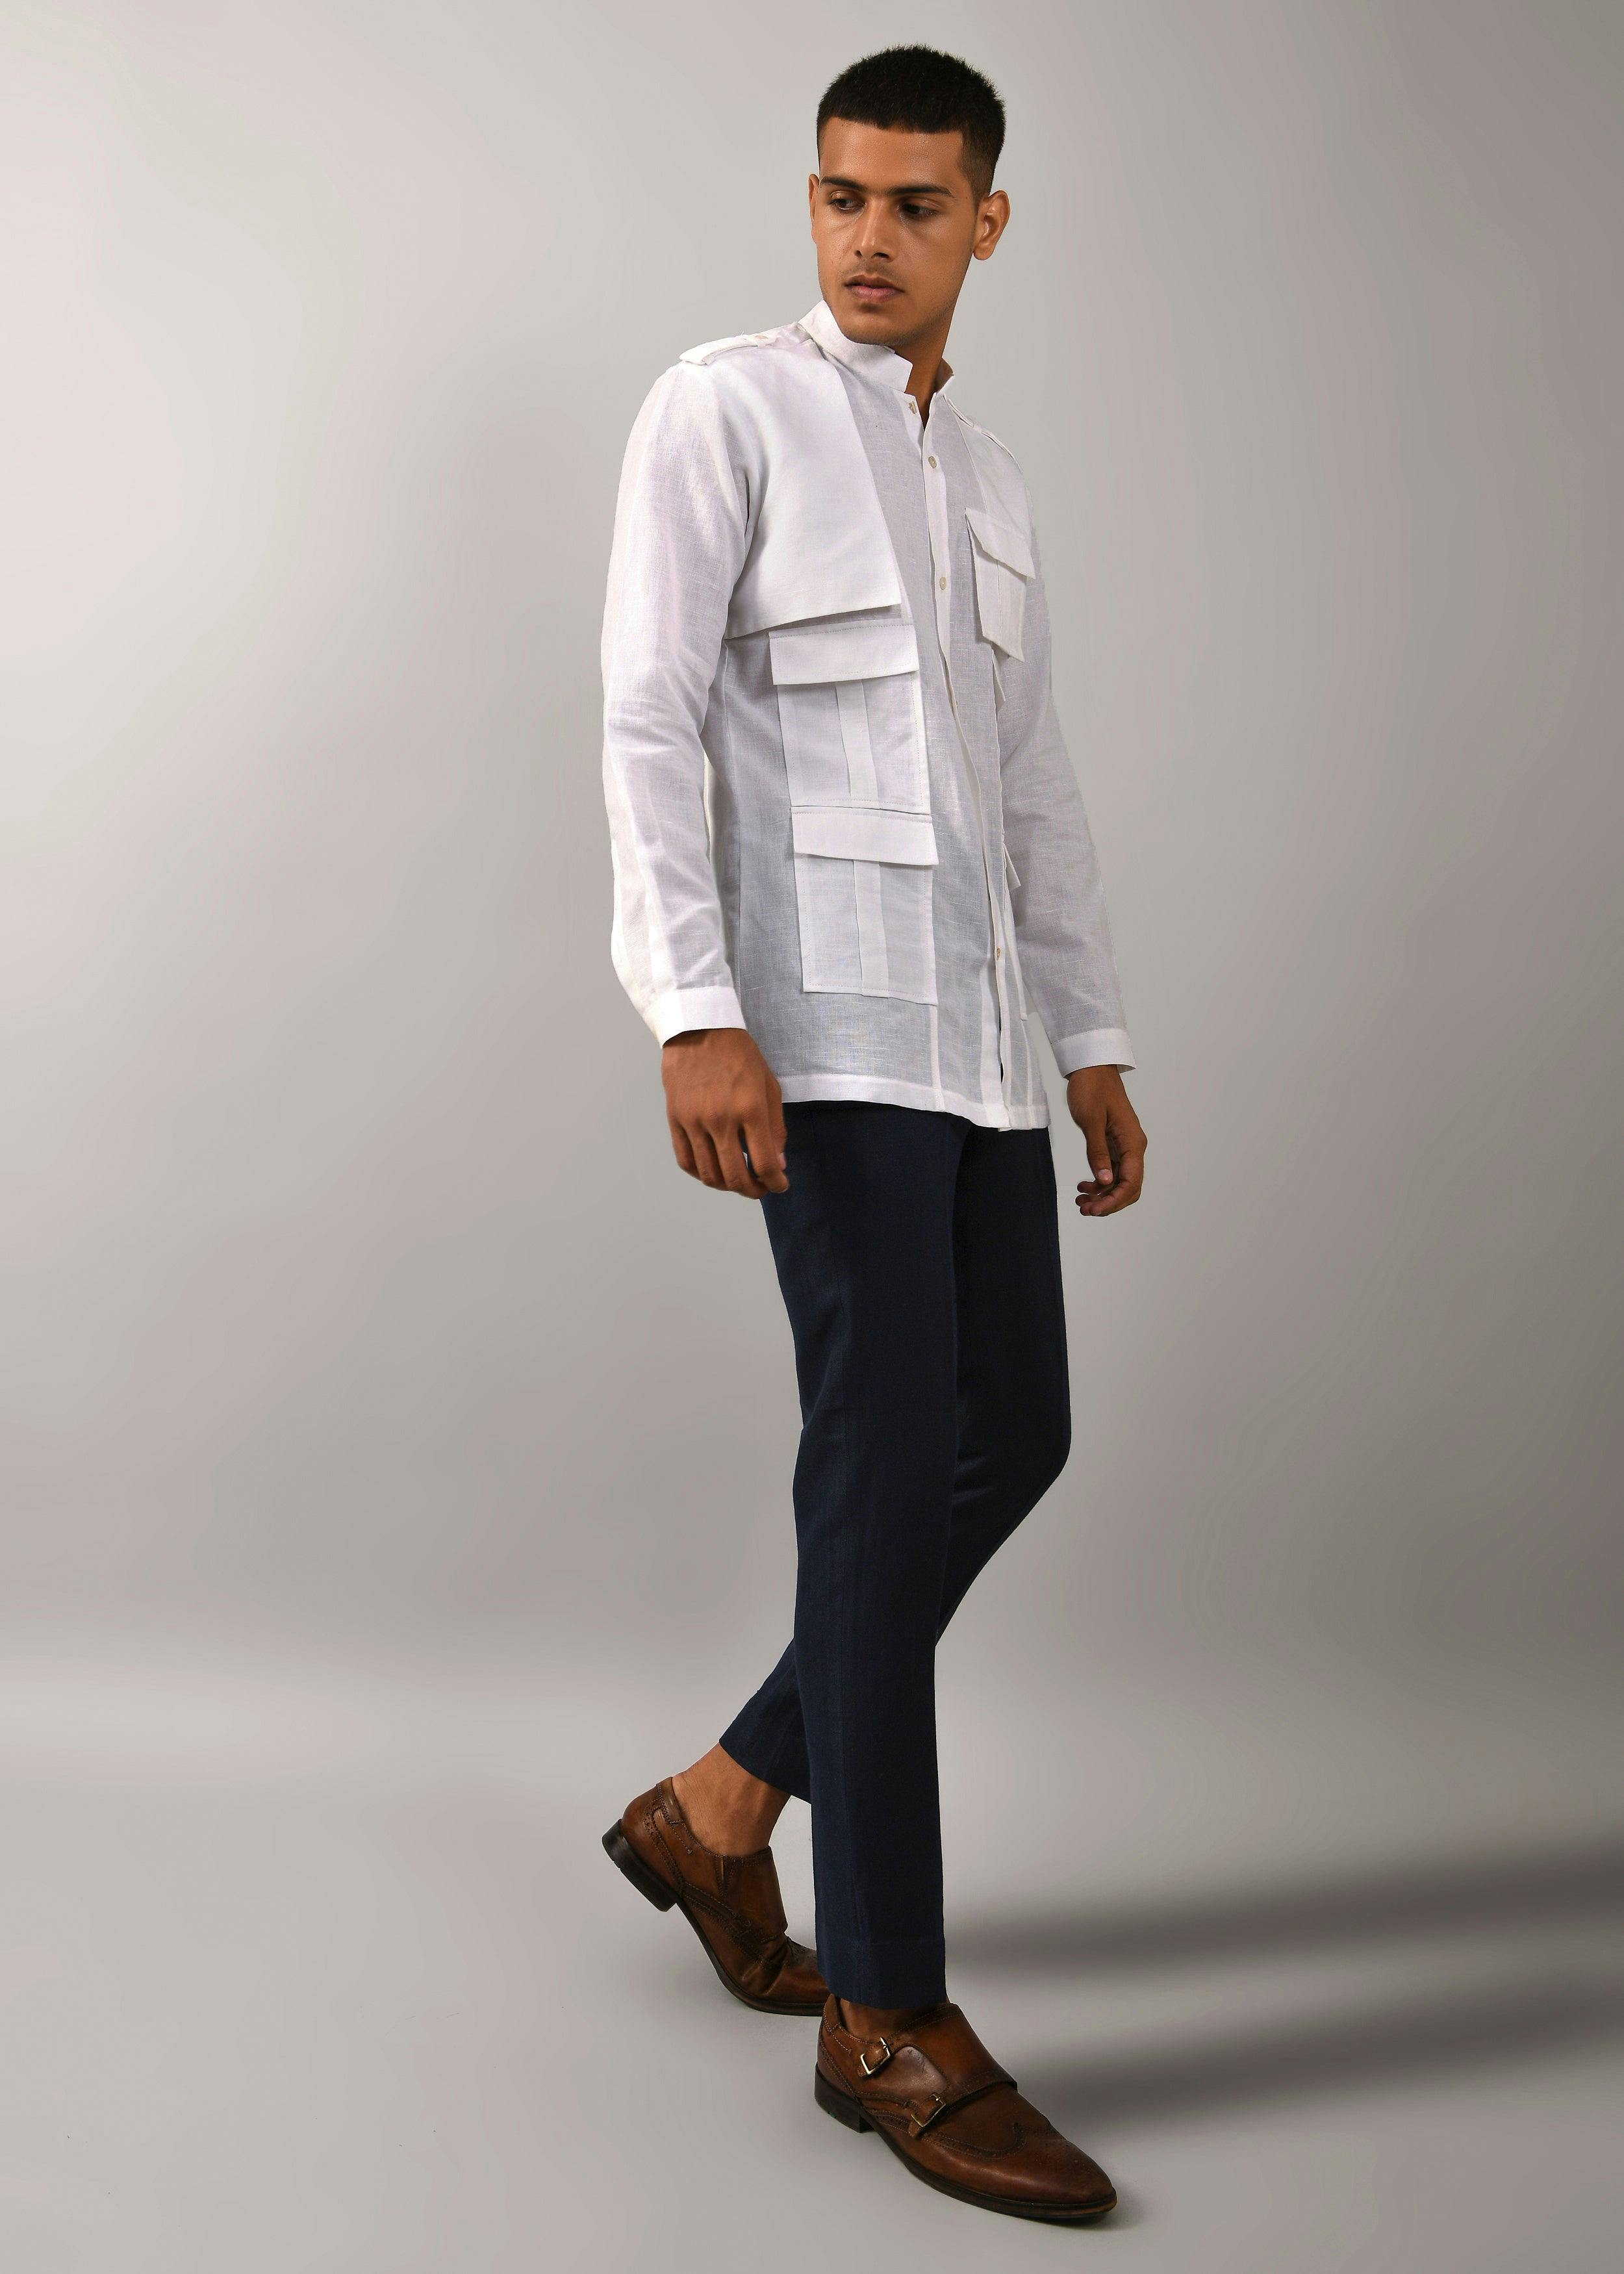 Classic Memoir Trench Shirt, a product by Country Made